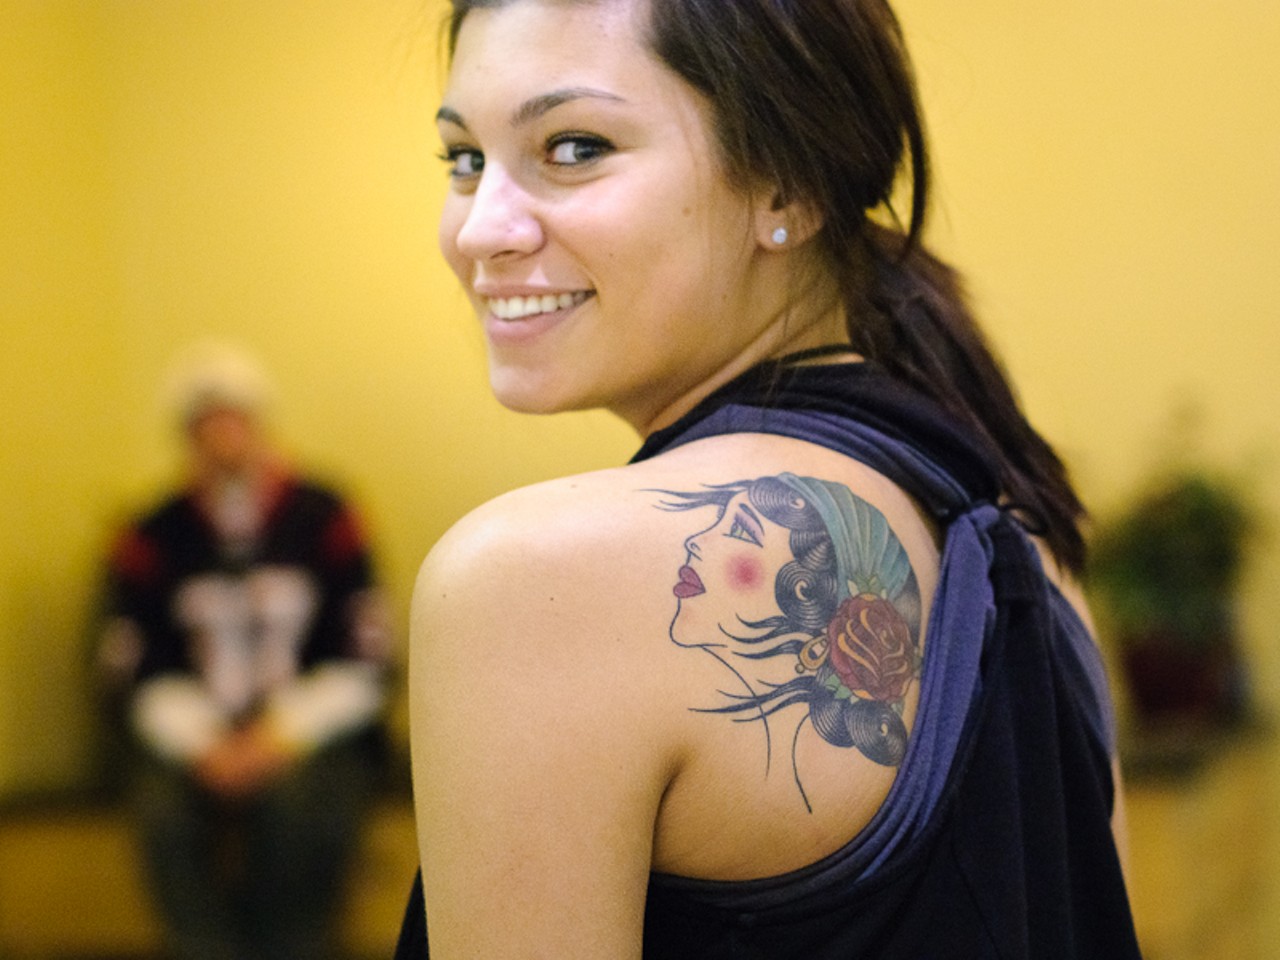 Melyssa Rapley from Waterford, Michigan shows her winning Small Colored Tattoo -- with green eyes that match her own.